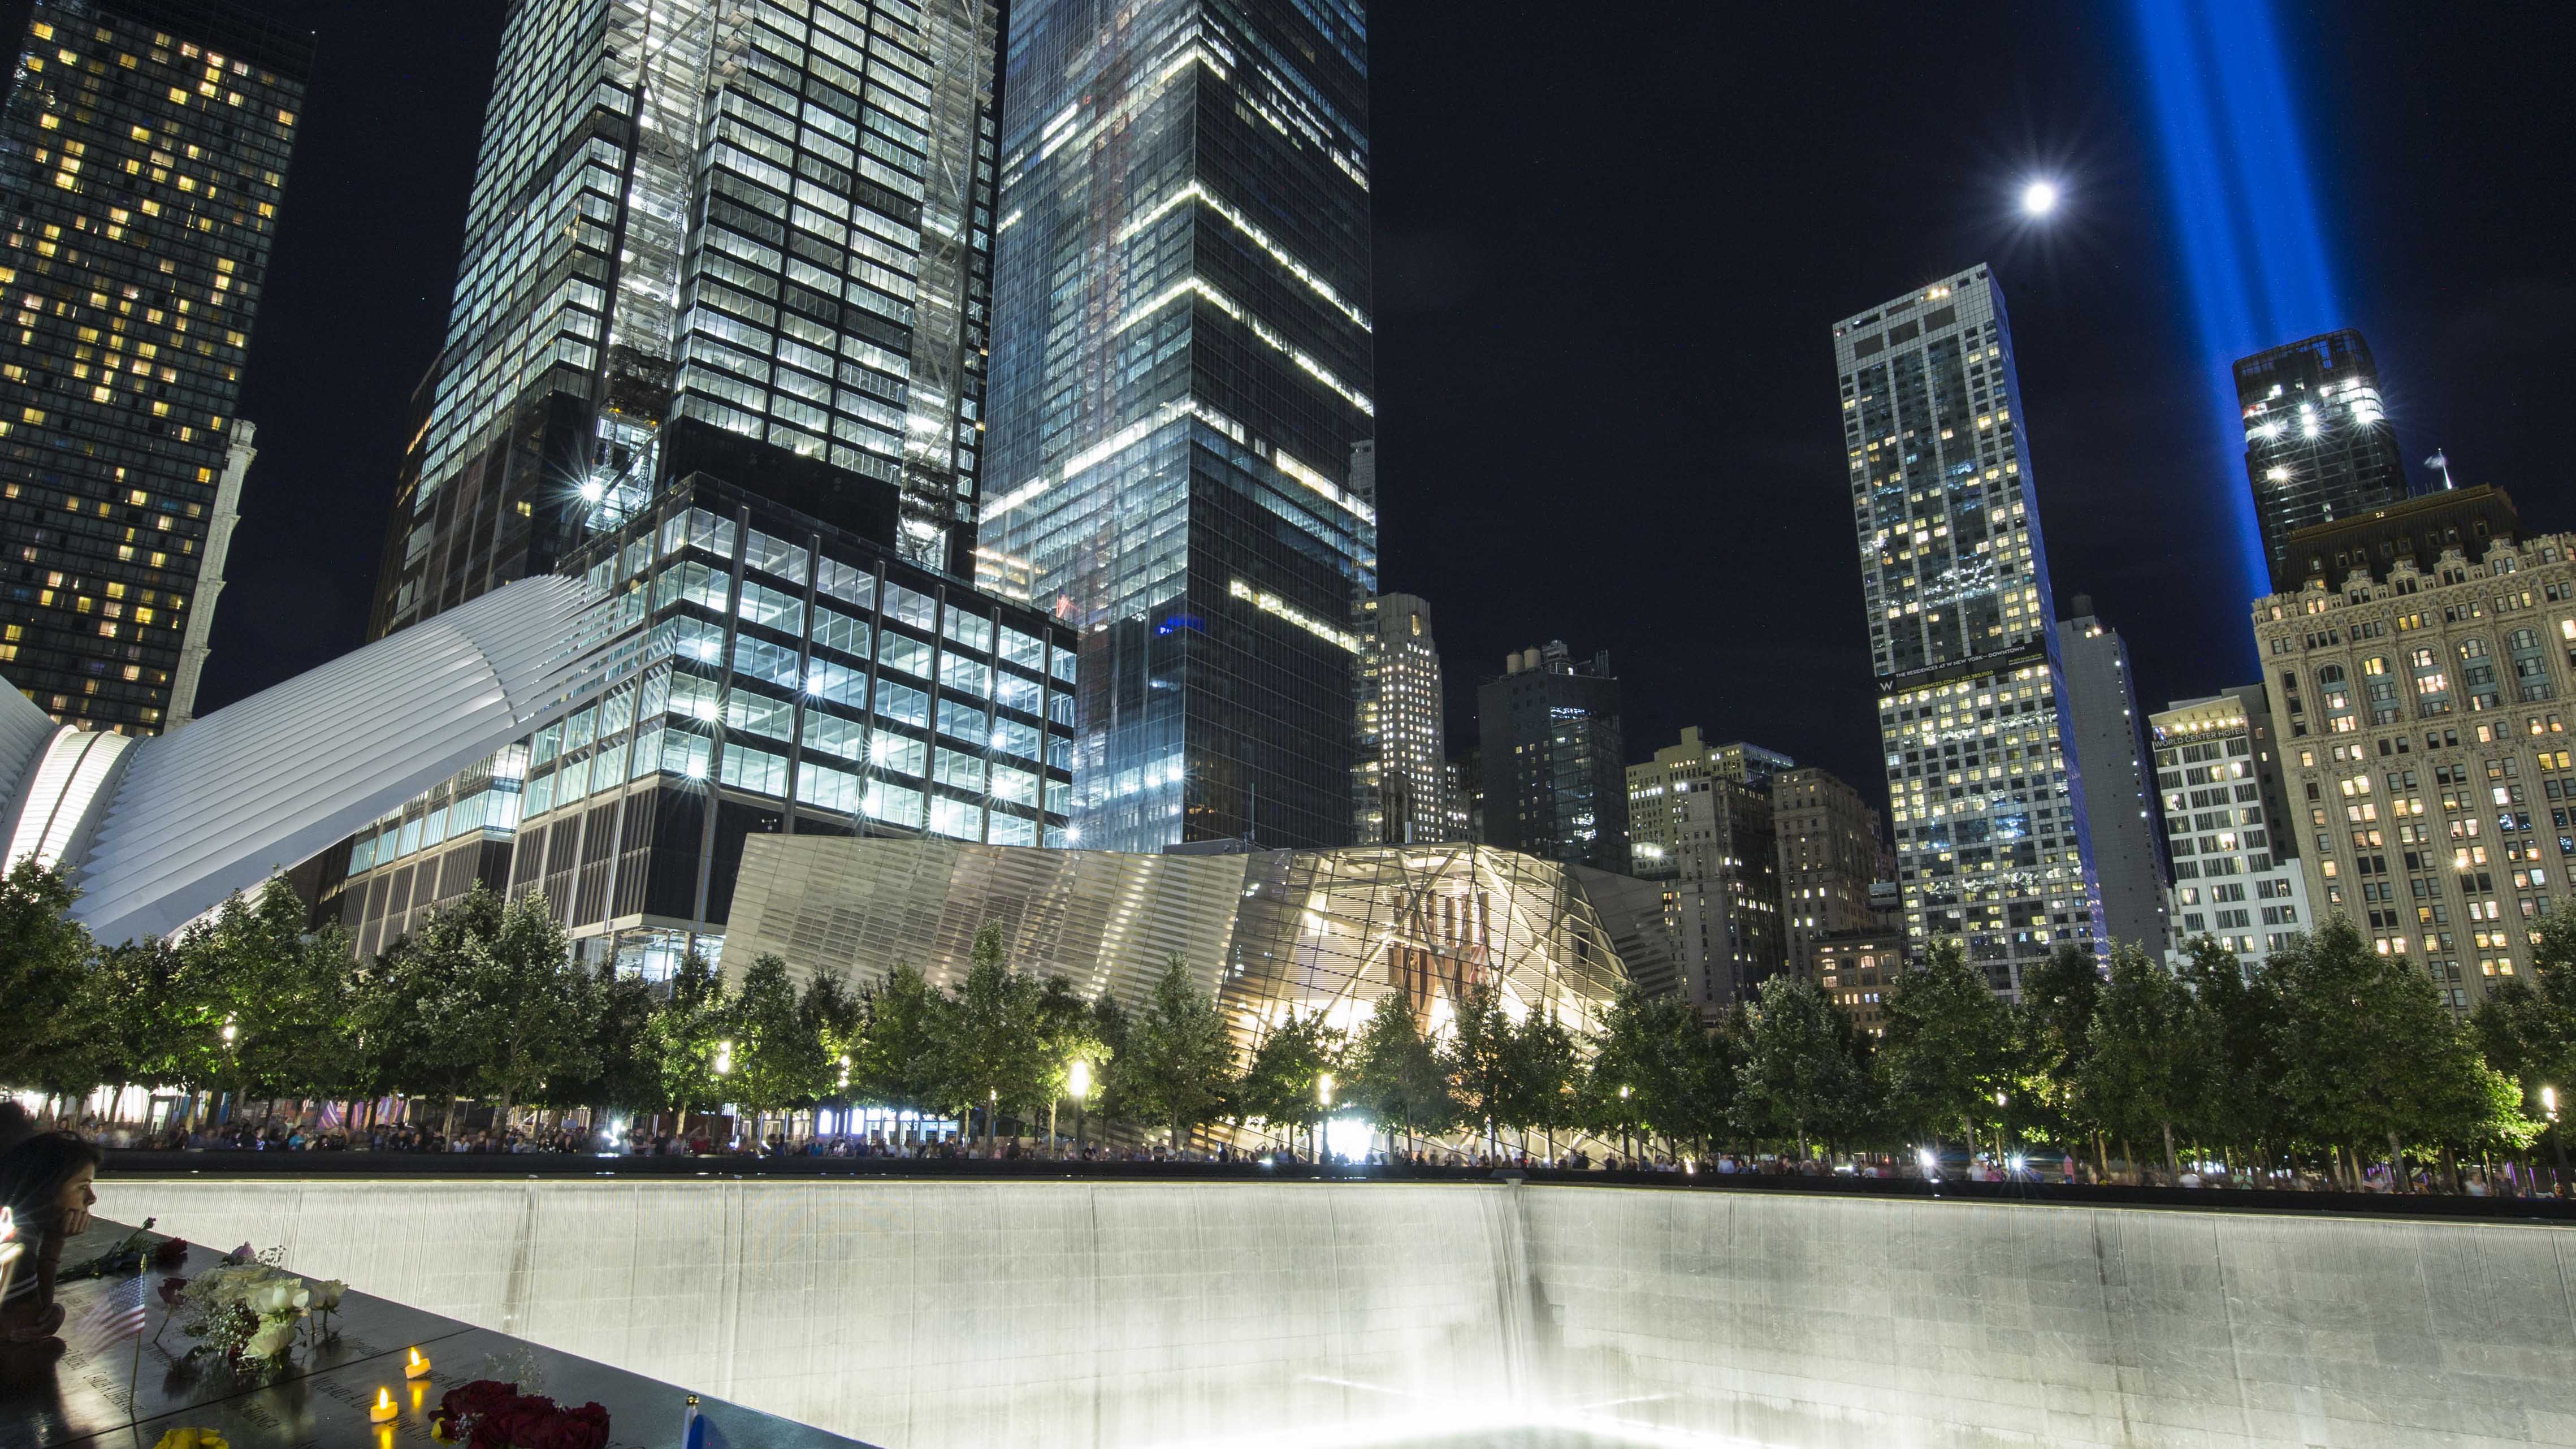 The twin beams of the Tribute in Light shine beside the moon over the buildings of lower Manhattan. In the foreground is the North Tower reflecting pool of Memorial Plaza.